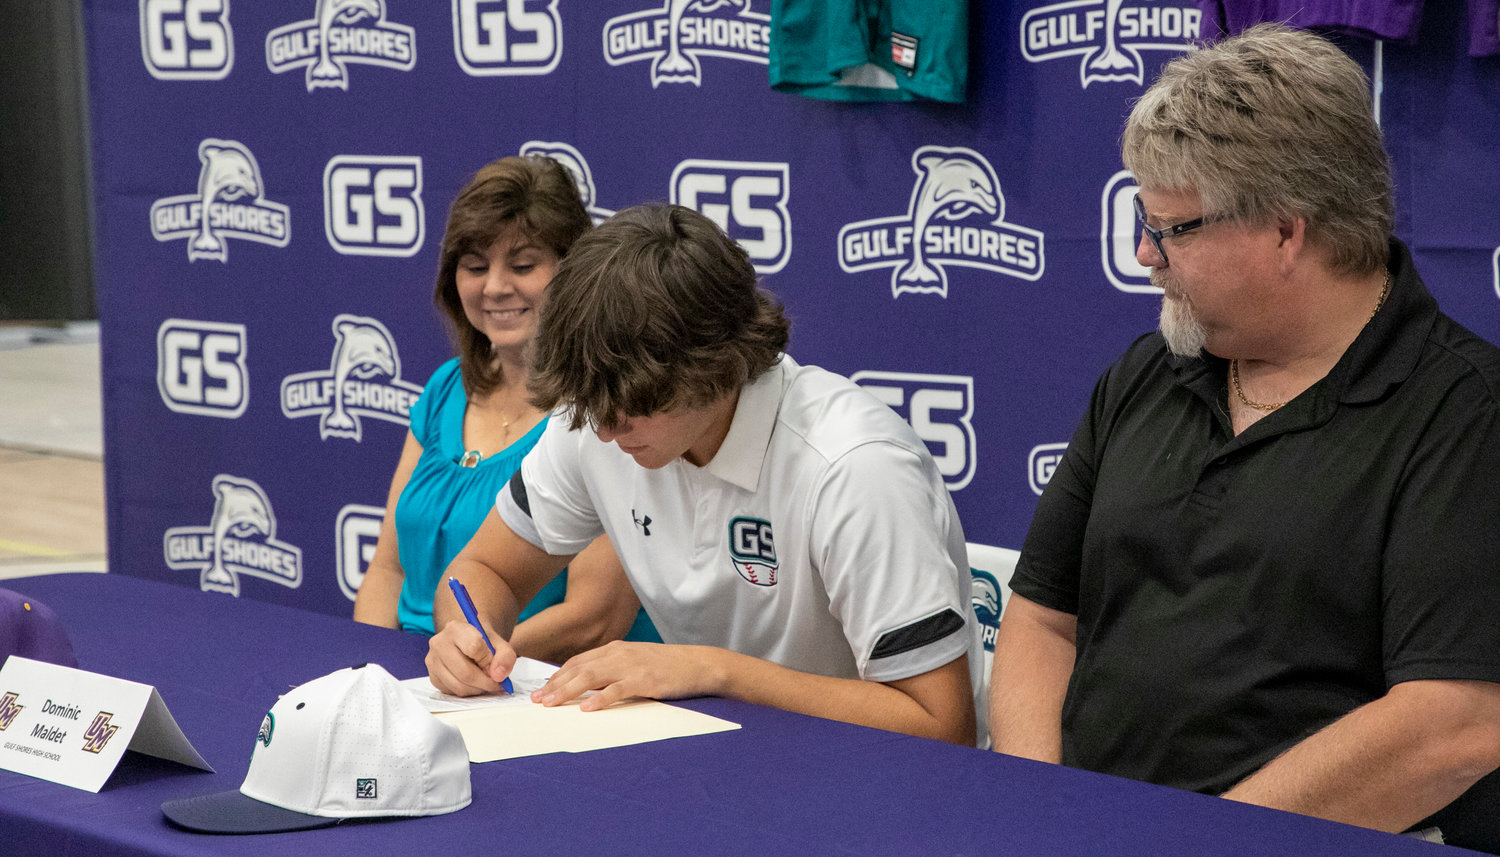 Gulf Shores senior Dominic Maldet puts pen to paper to cement his commitment to the Montevallo Falcons baseball program after his time with the Dolphins during Wednesday’s signing ceremony at the high school.